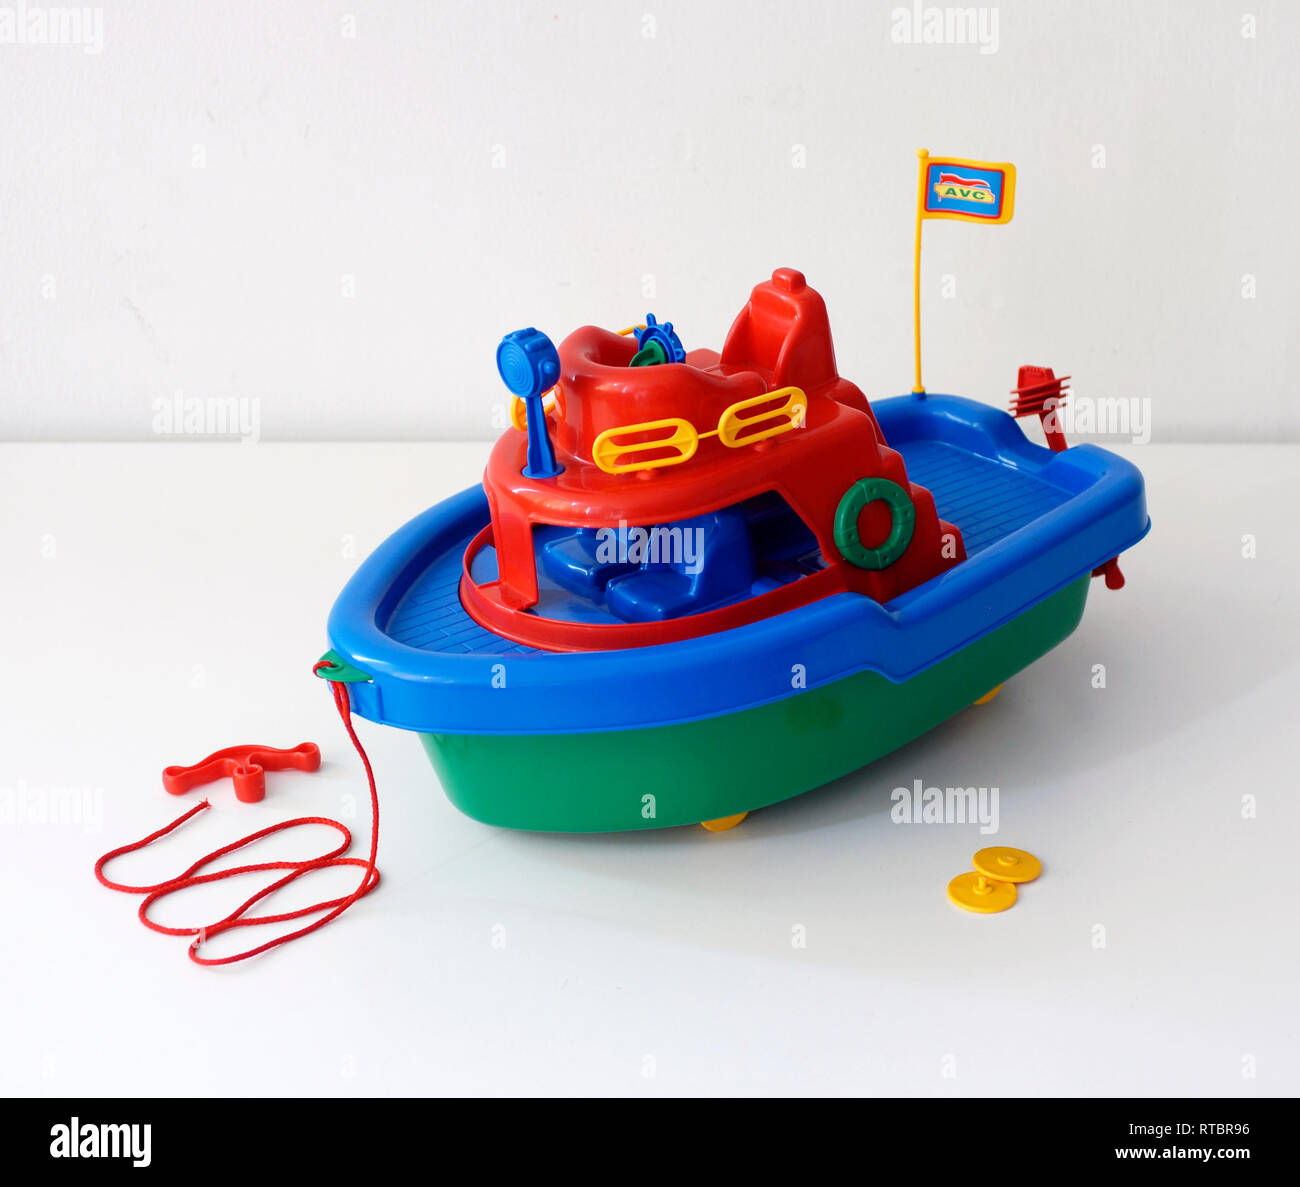 Vintage toy boat, colored plastic Stock Photo